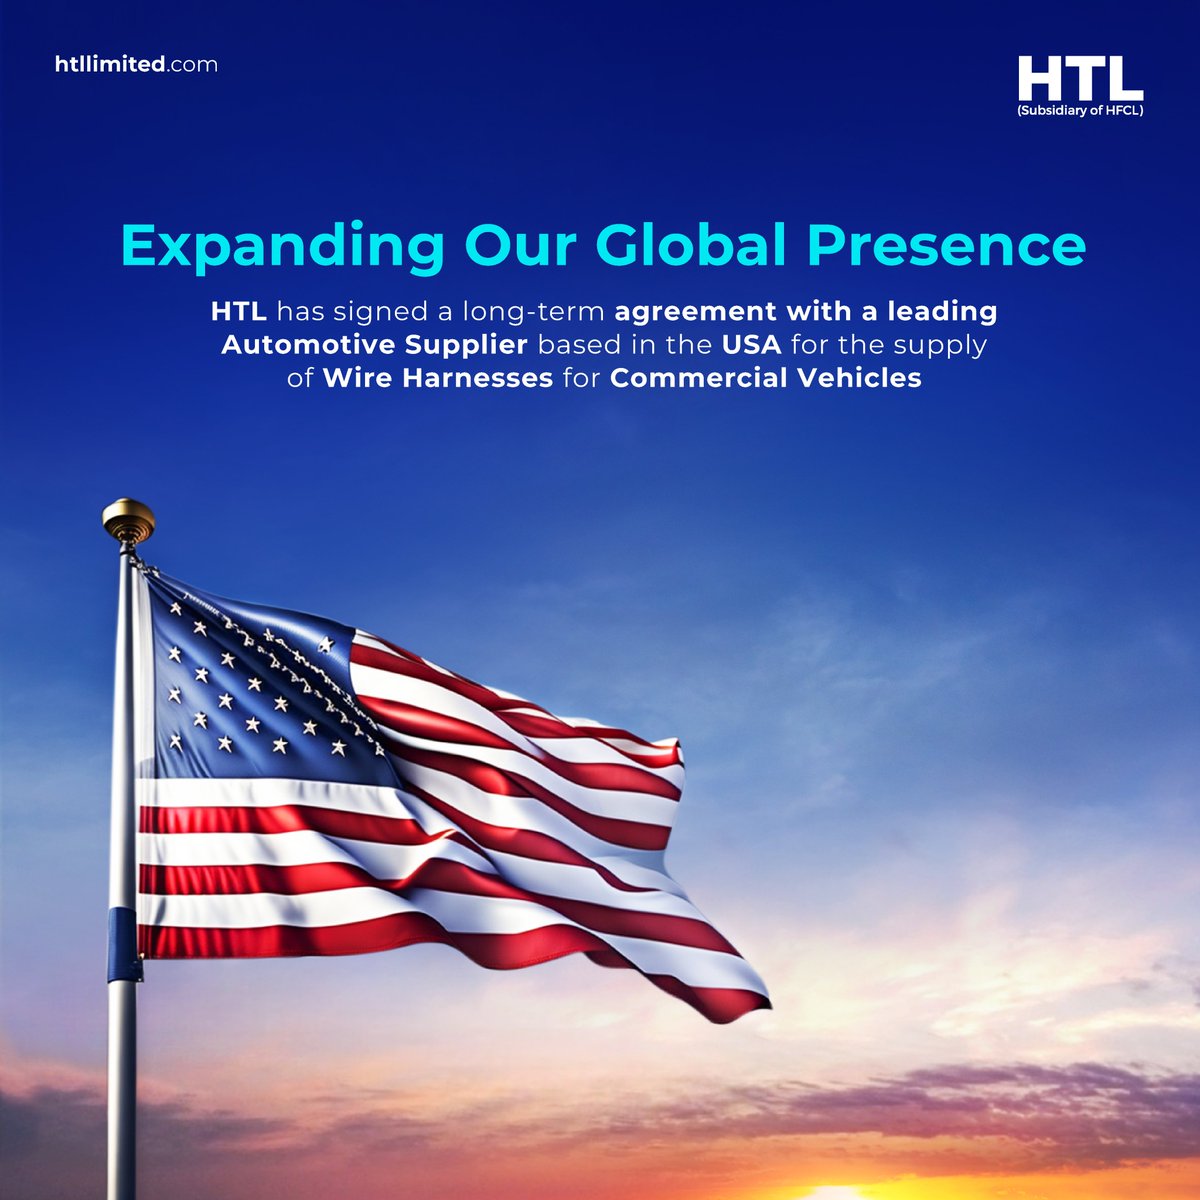 HTL continues to expand its global market access for wire harness & connecting solutions among Global OEMs.

#automotivewiringharness #wiringharness #wiringharnessexport #innovation #OEM #Automotive #DesigntoDelivery #businesswins #newgeographies #newcustomers